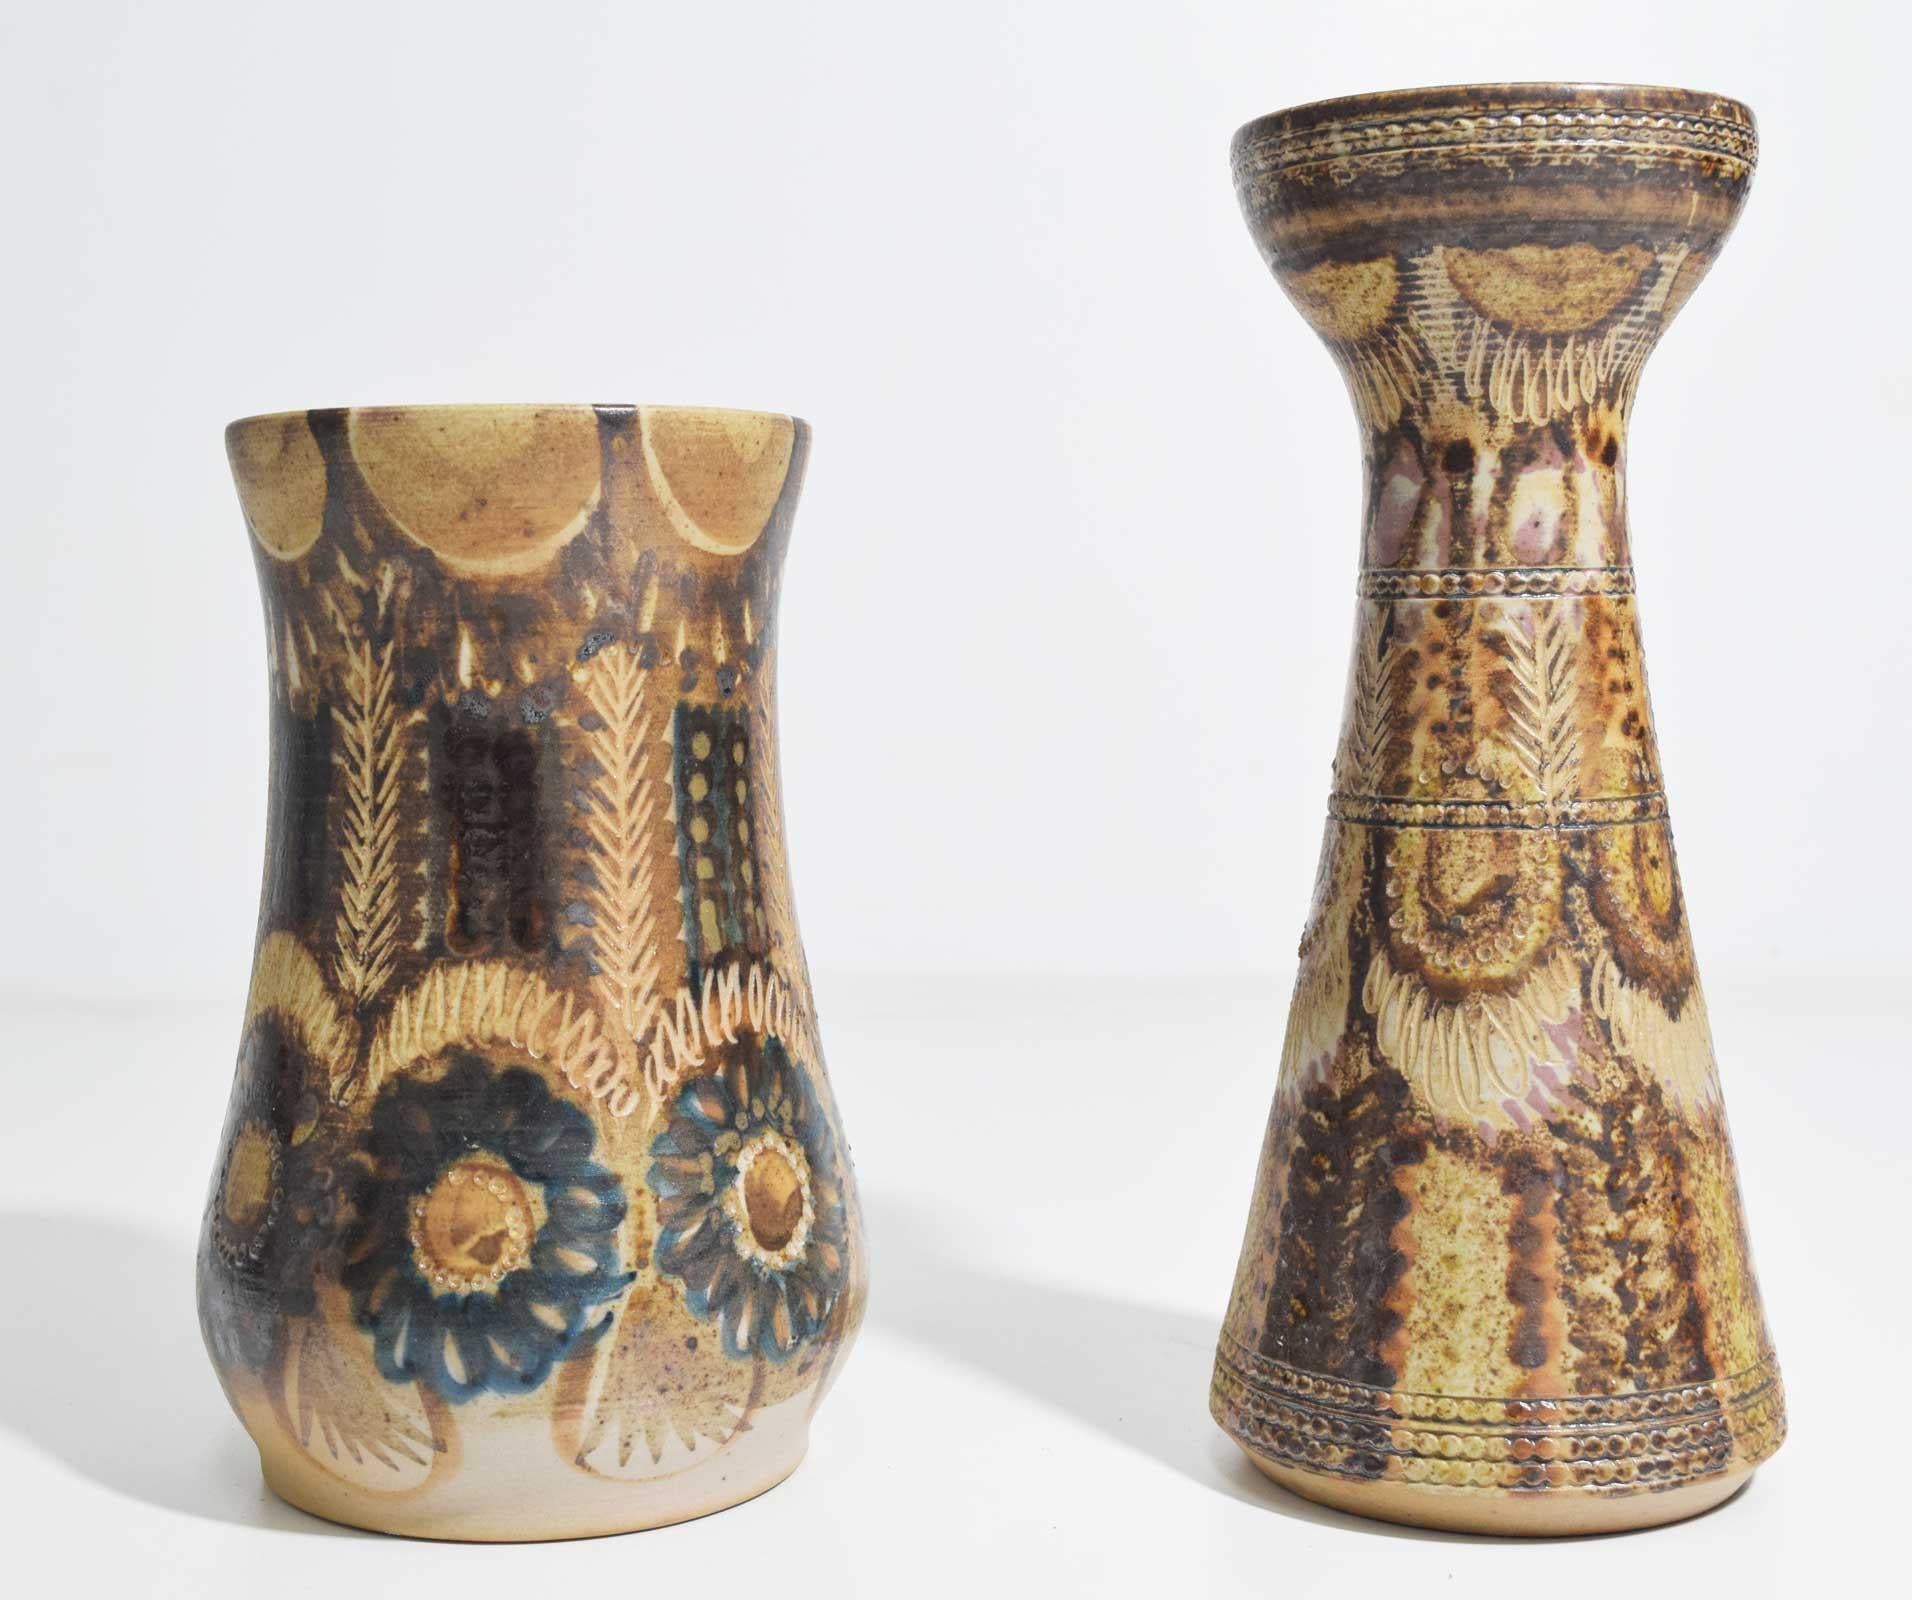 Beautiful ceramic vases with flower motif by Jean-Claude Courjault. Measures: Largest is 10.5